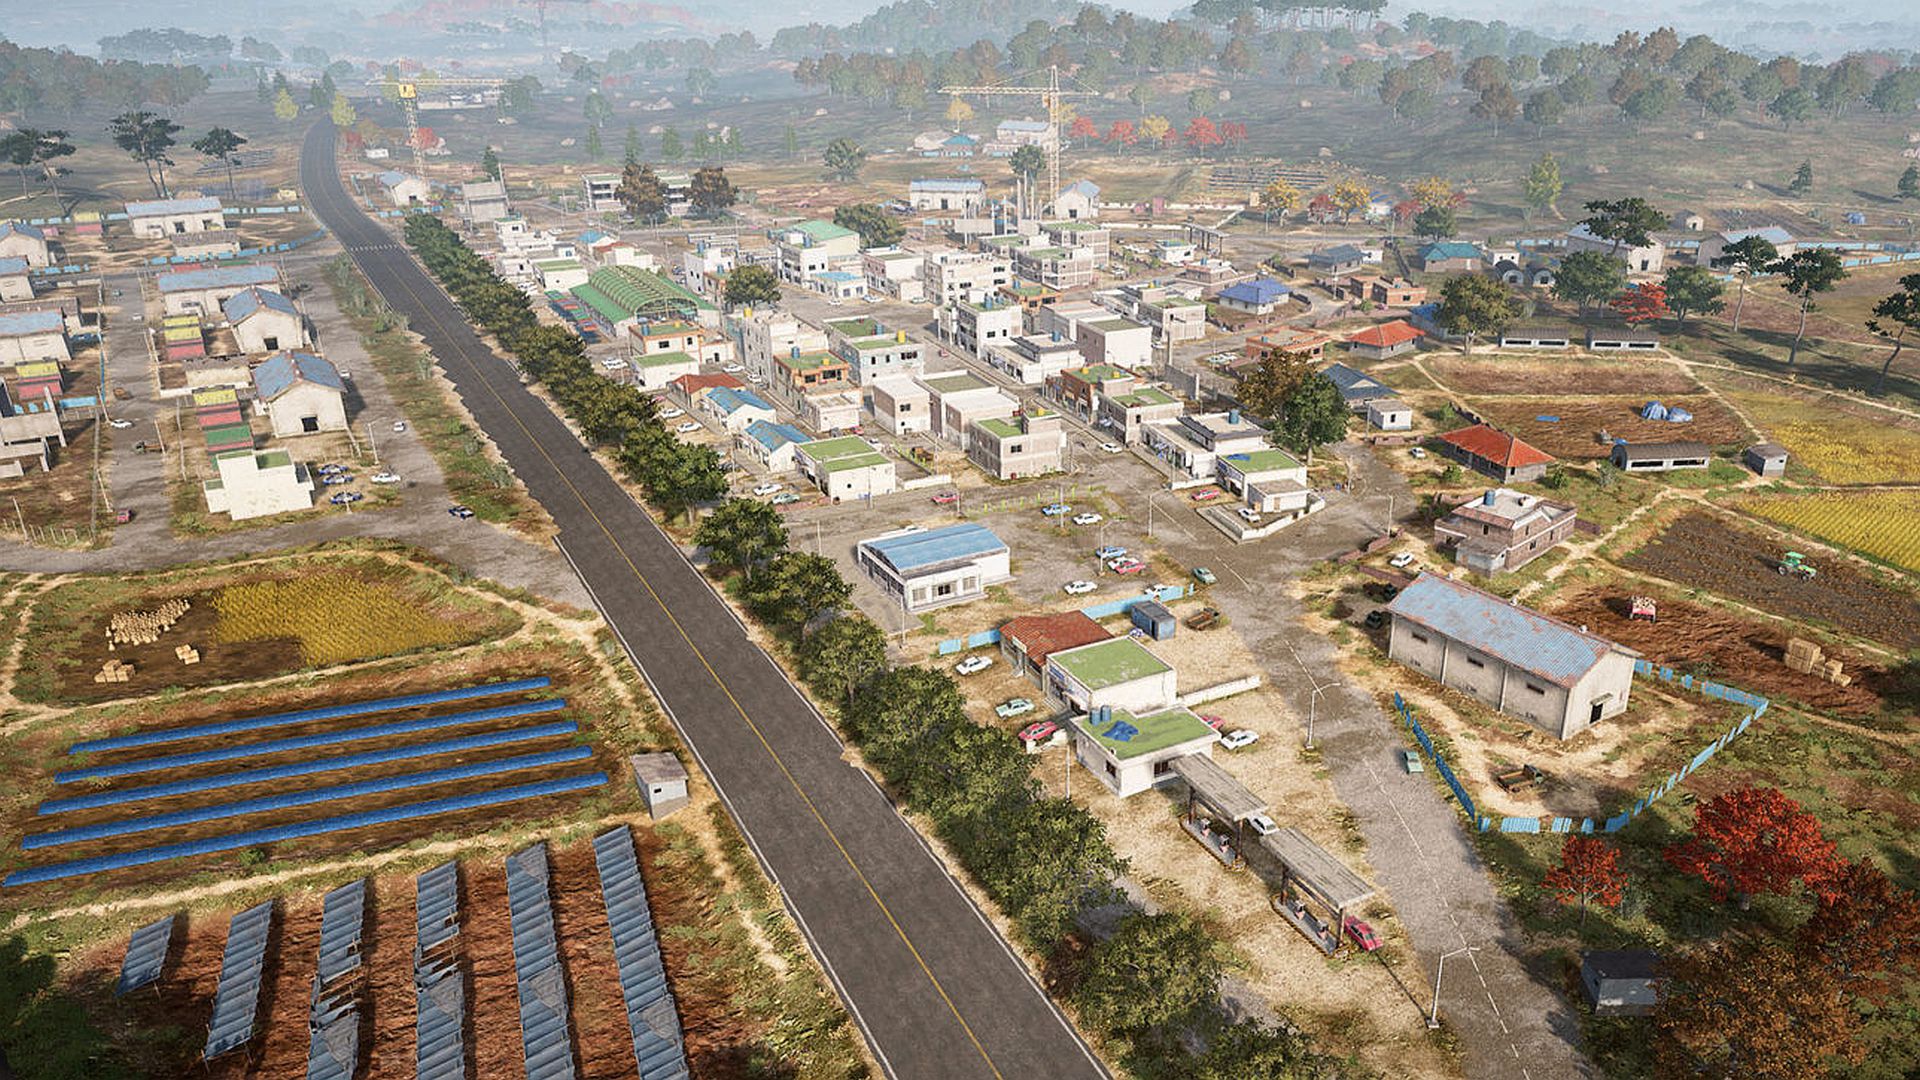 PUBG map Taego was initially based on Seoul, but it “turned out much differently”